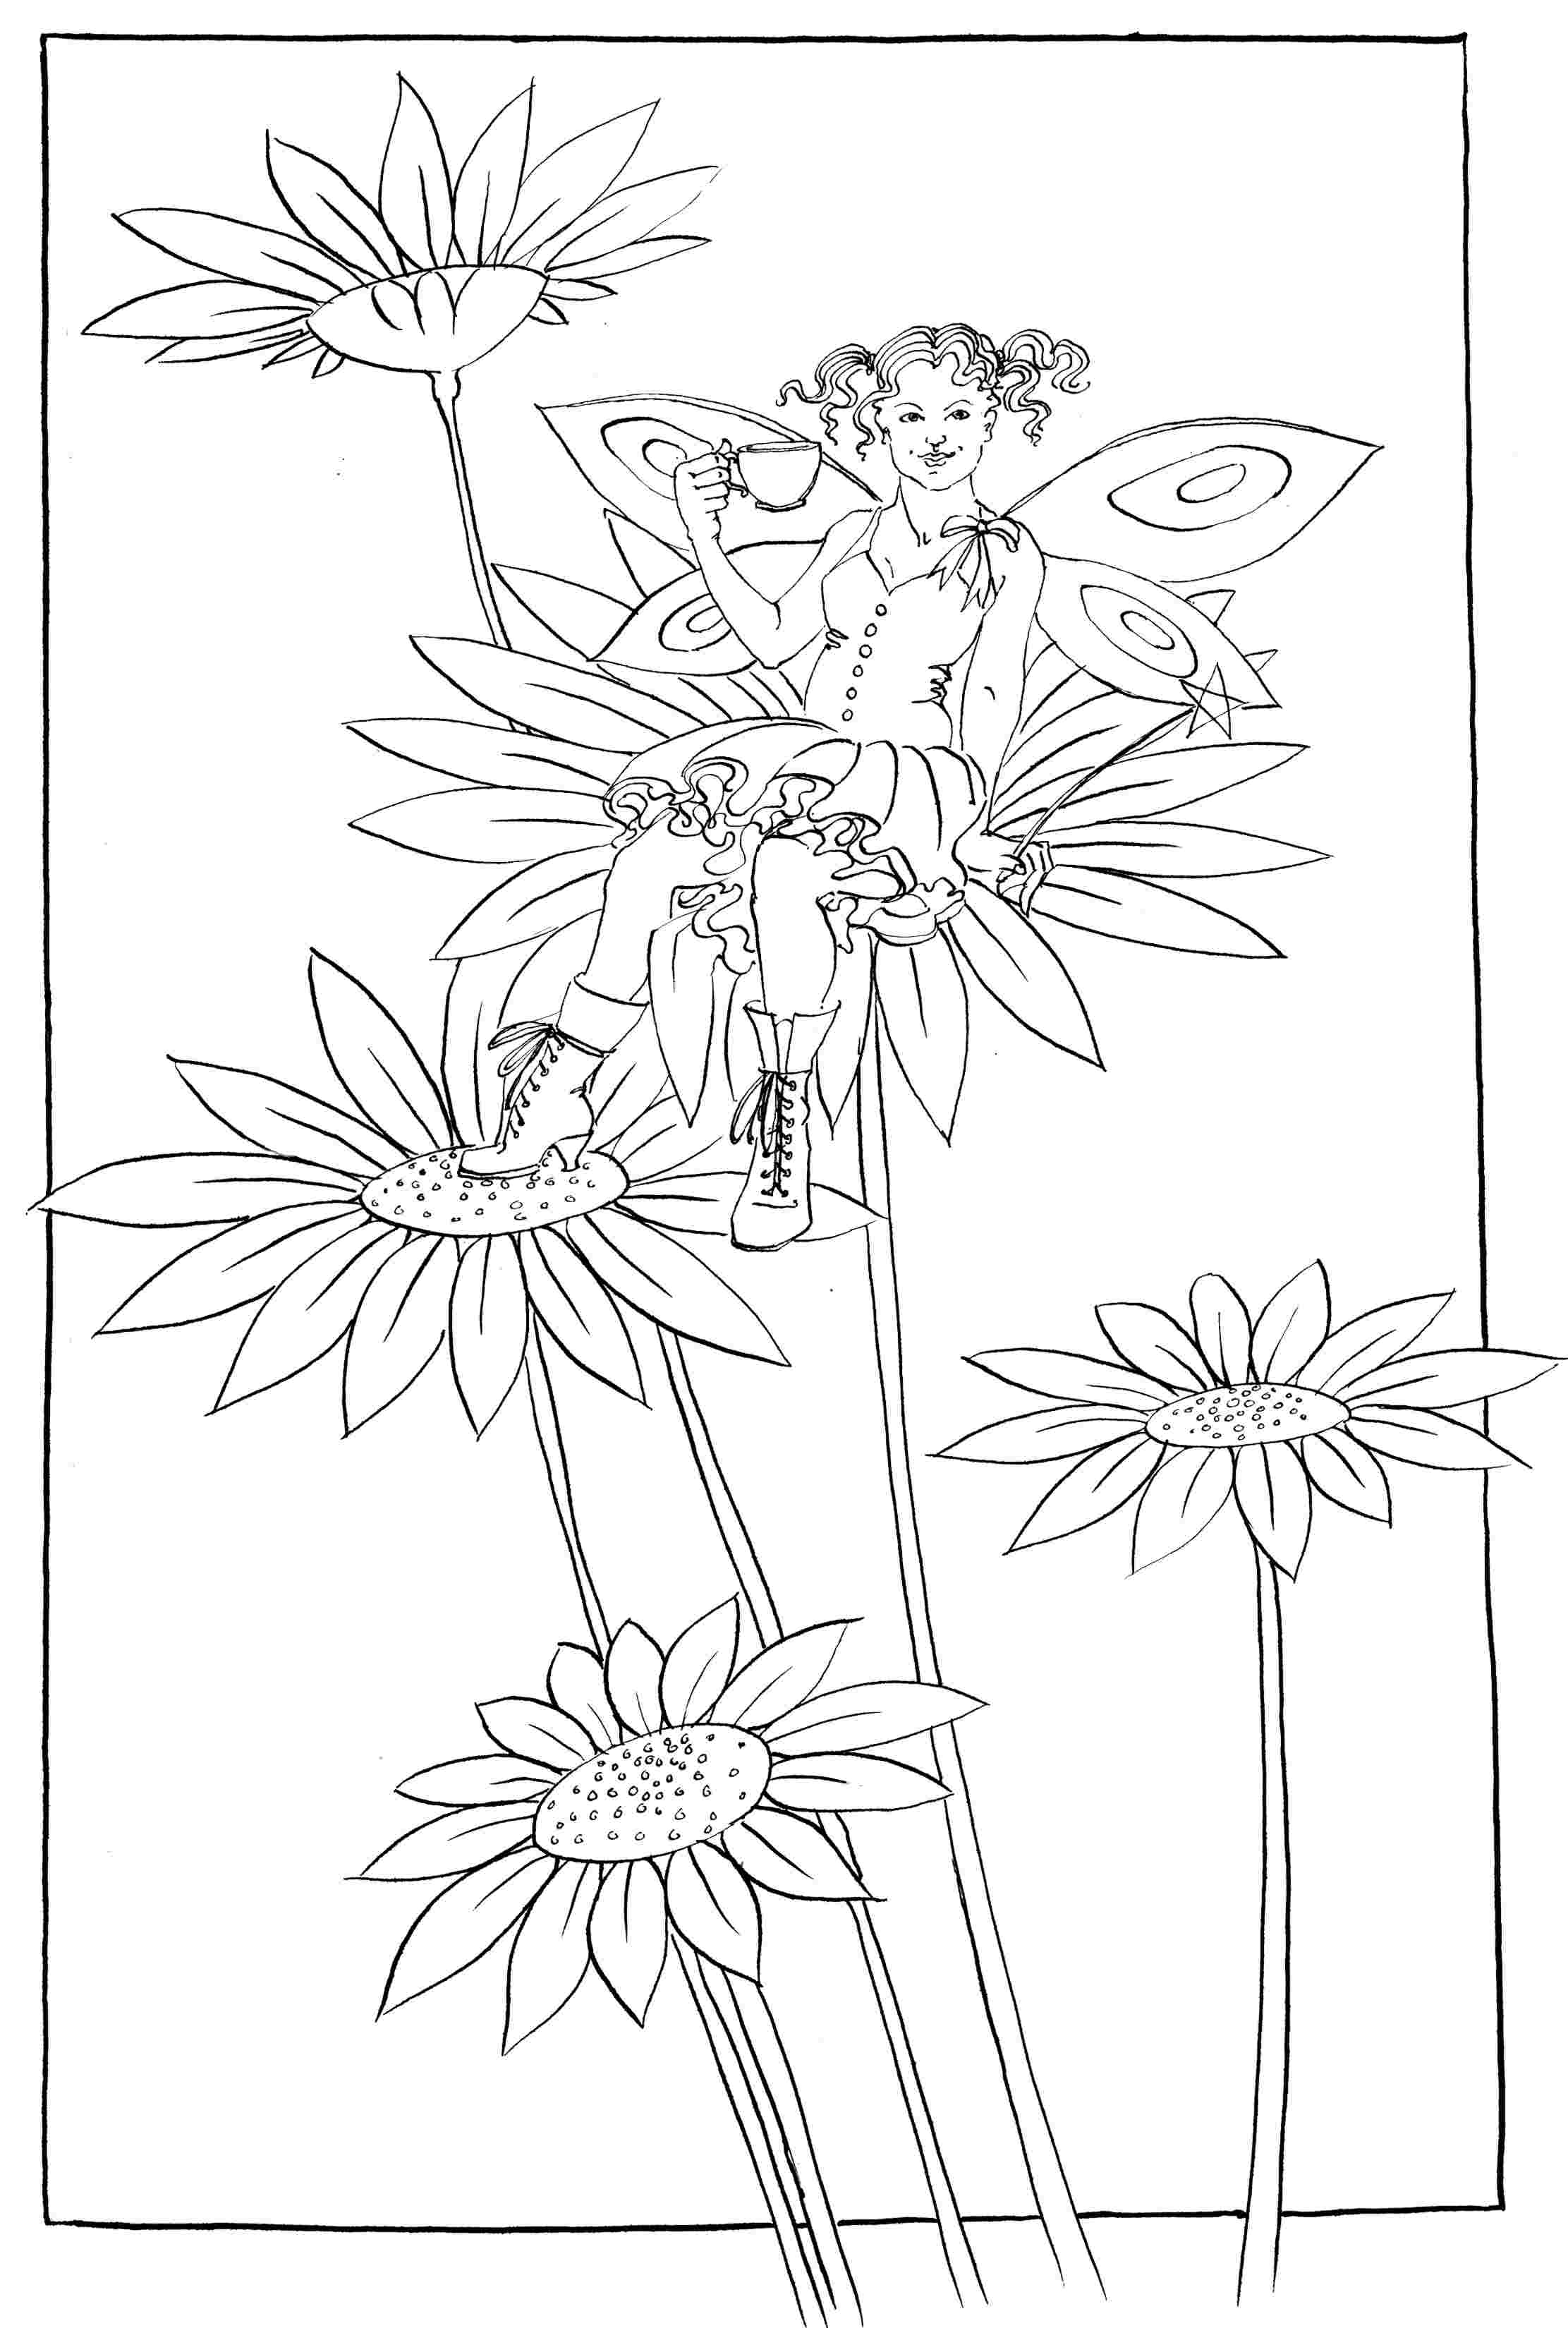 Daisy Boots - colouring-in drawing - to download, right click and save, print out and colour in!